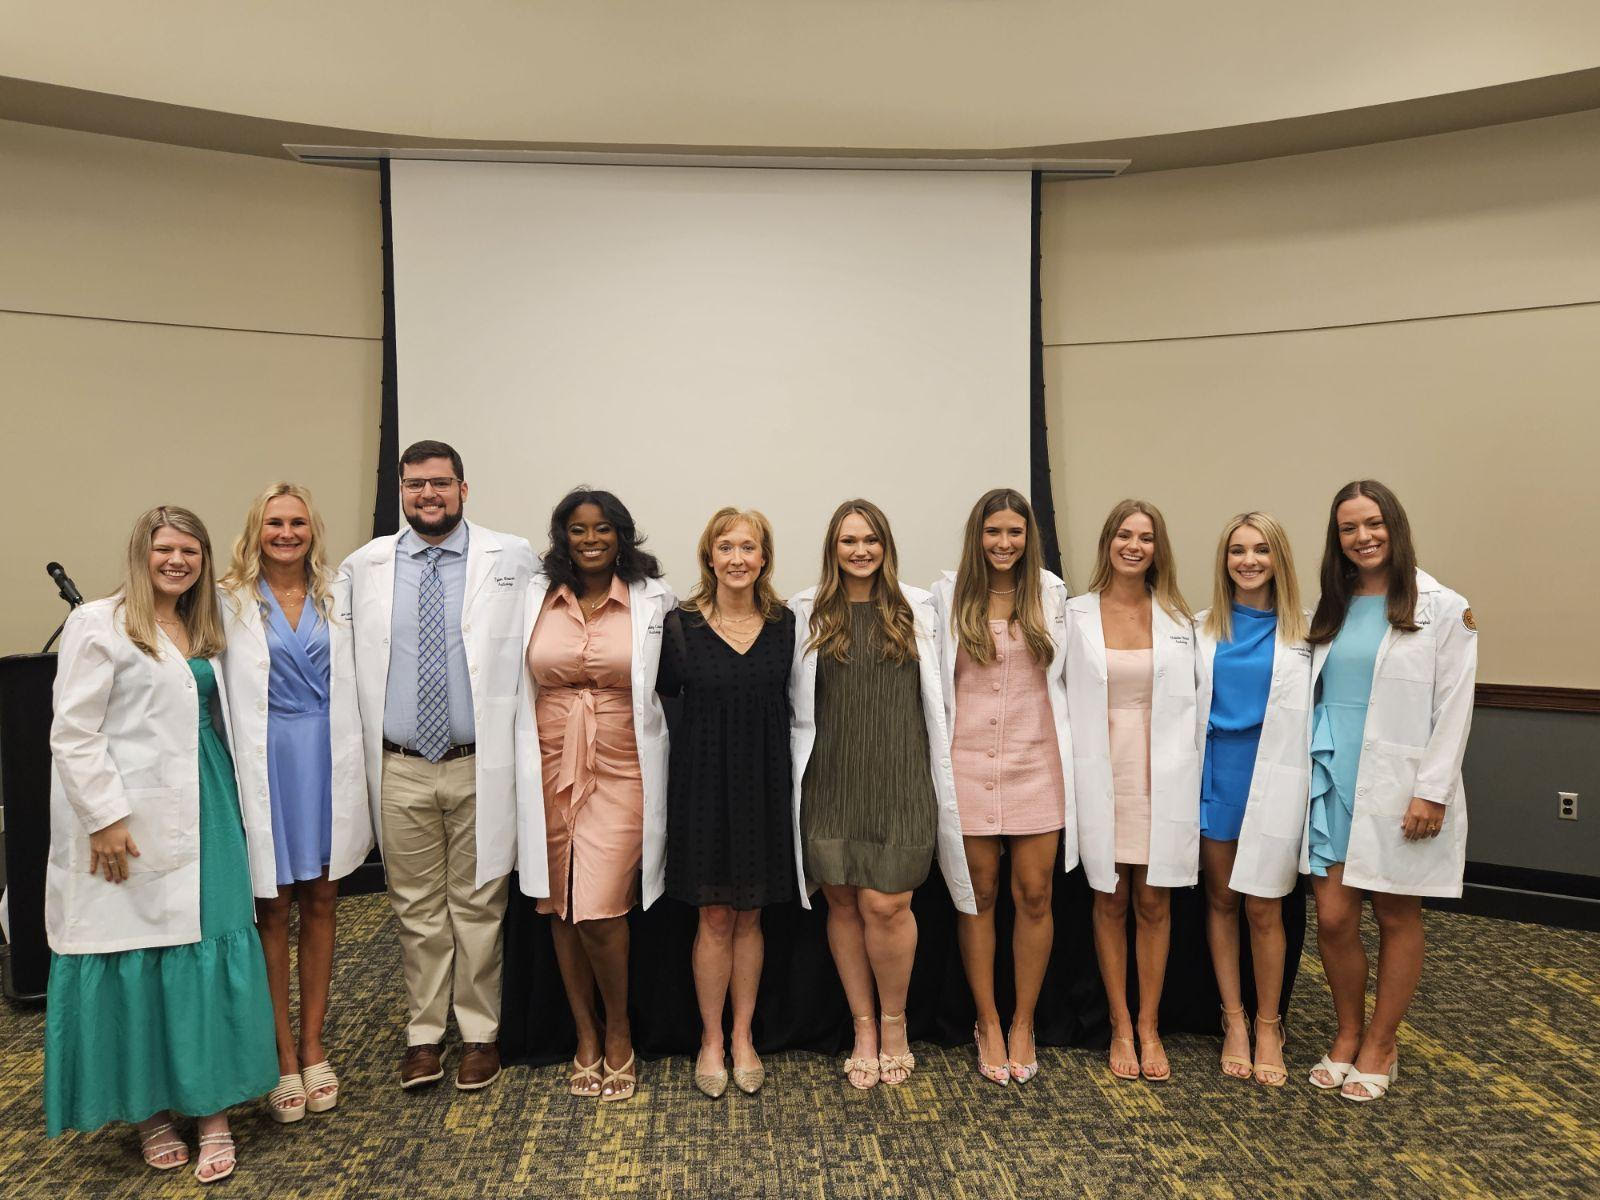 Maddie Lynn Anderson of Meridian, Miss.  · Krissy Hall of Tupelo, Miss.  · Paige Crump of Bolivar, Tenn.  · Ashley Conner of Houston, Miss.  · Savannah Sanders of Tupelo, Miss.  · Tyler Weaver of Oxford, Miss.  · Maison Larmore of Gulfport, Miss.  · Natalie Harvel of Raleigh, Miss.  · Perry Hershfelt of Tupelo, Miss.